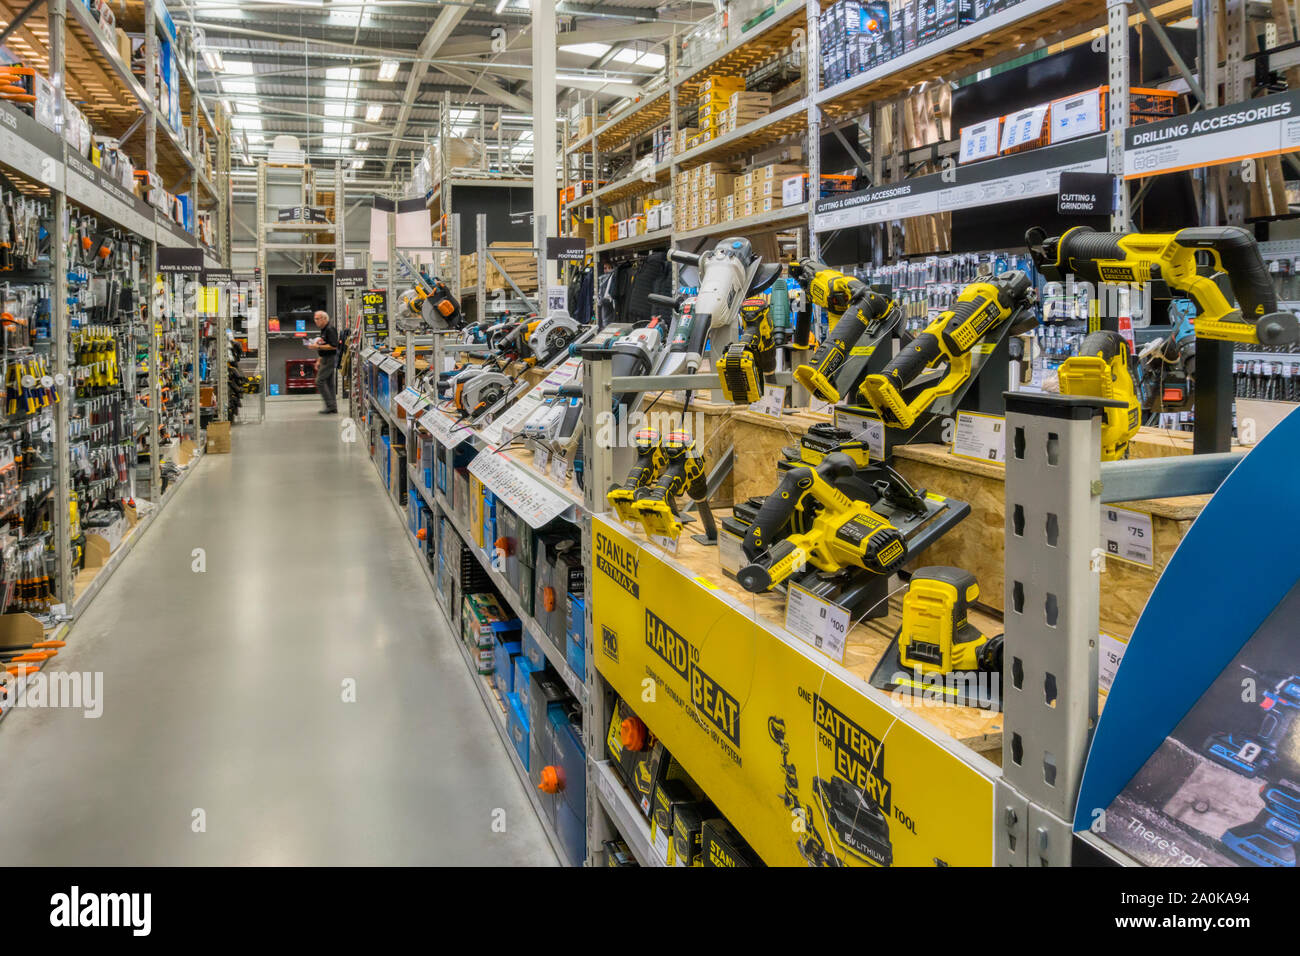 Racks and displays of tools for sale in a B&Q DIY warehouse. Stock Photo